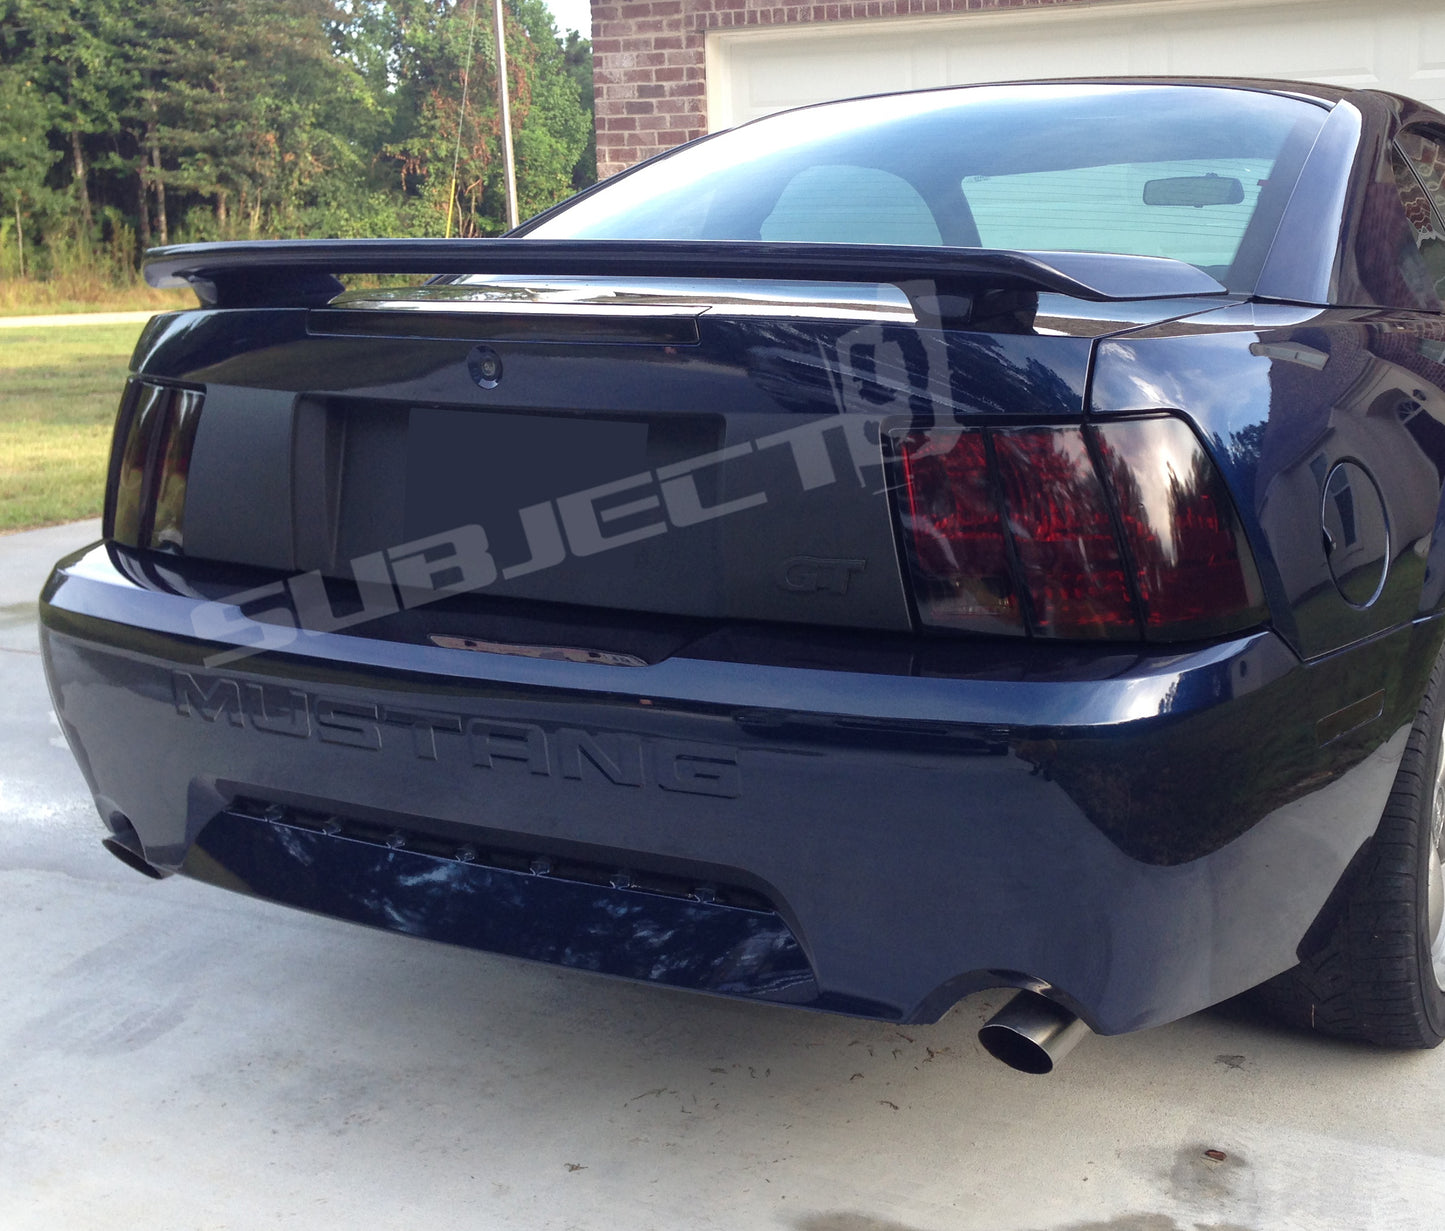 99-04 Ford Mustang Taillight Tint Vinyl Overlays